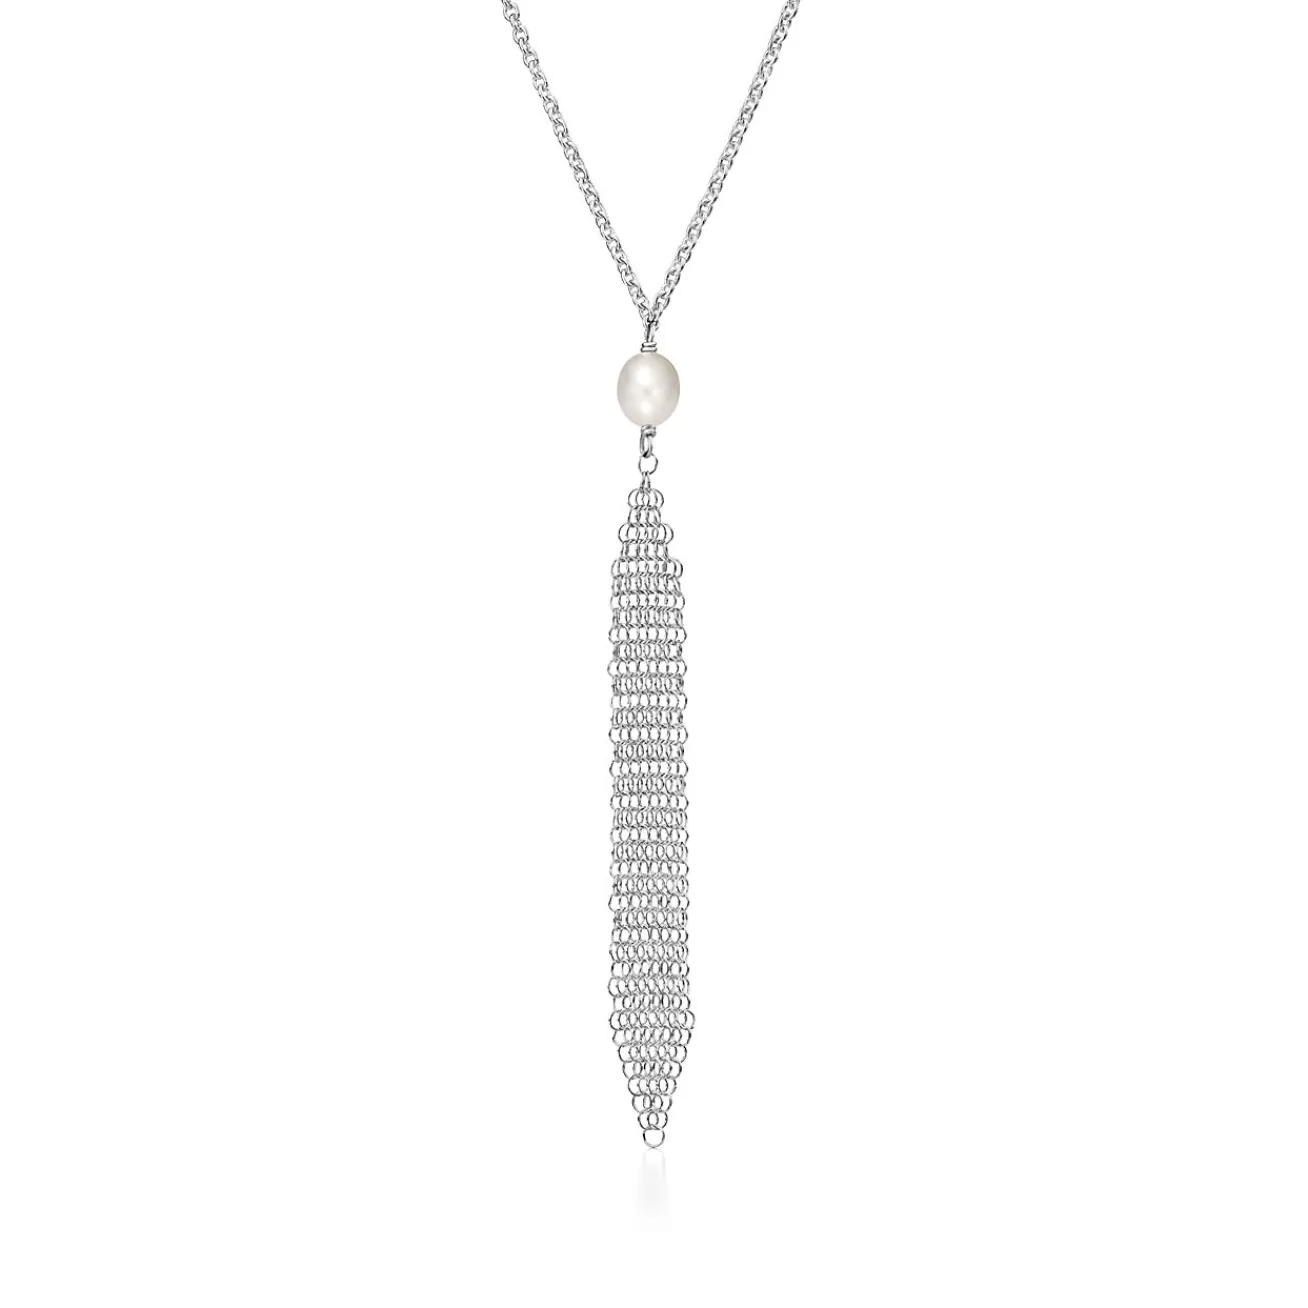 Tiffany & Co. Elsa Peretti® Mesh tassel pendant in sterling silver with a freshwater pearl. | ^ Necklaces & Pendants | Sterling Silver Jewelry